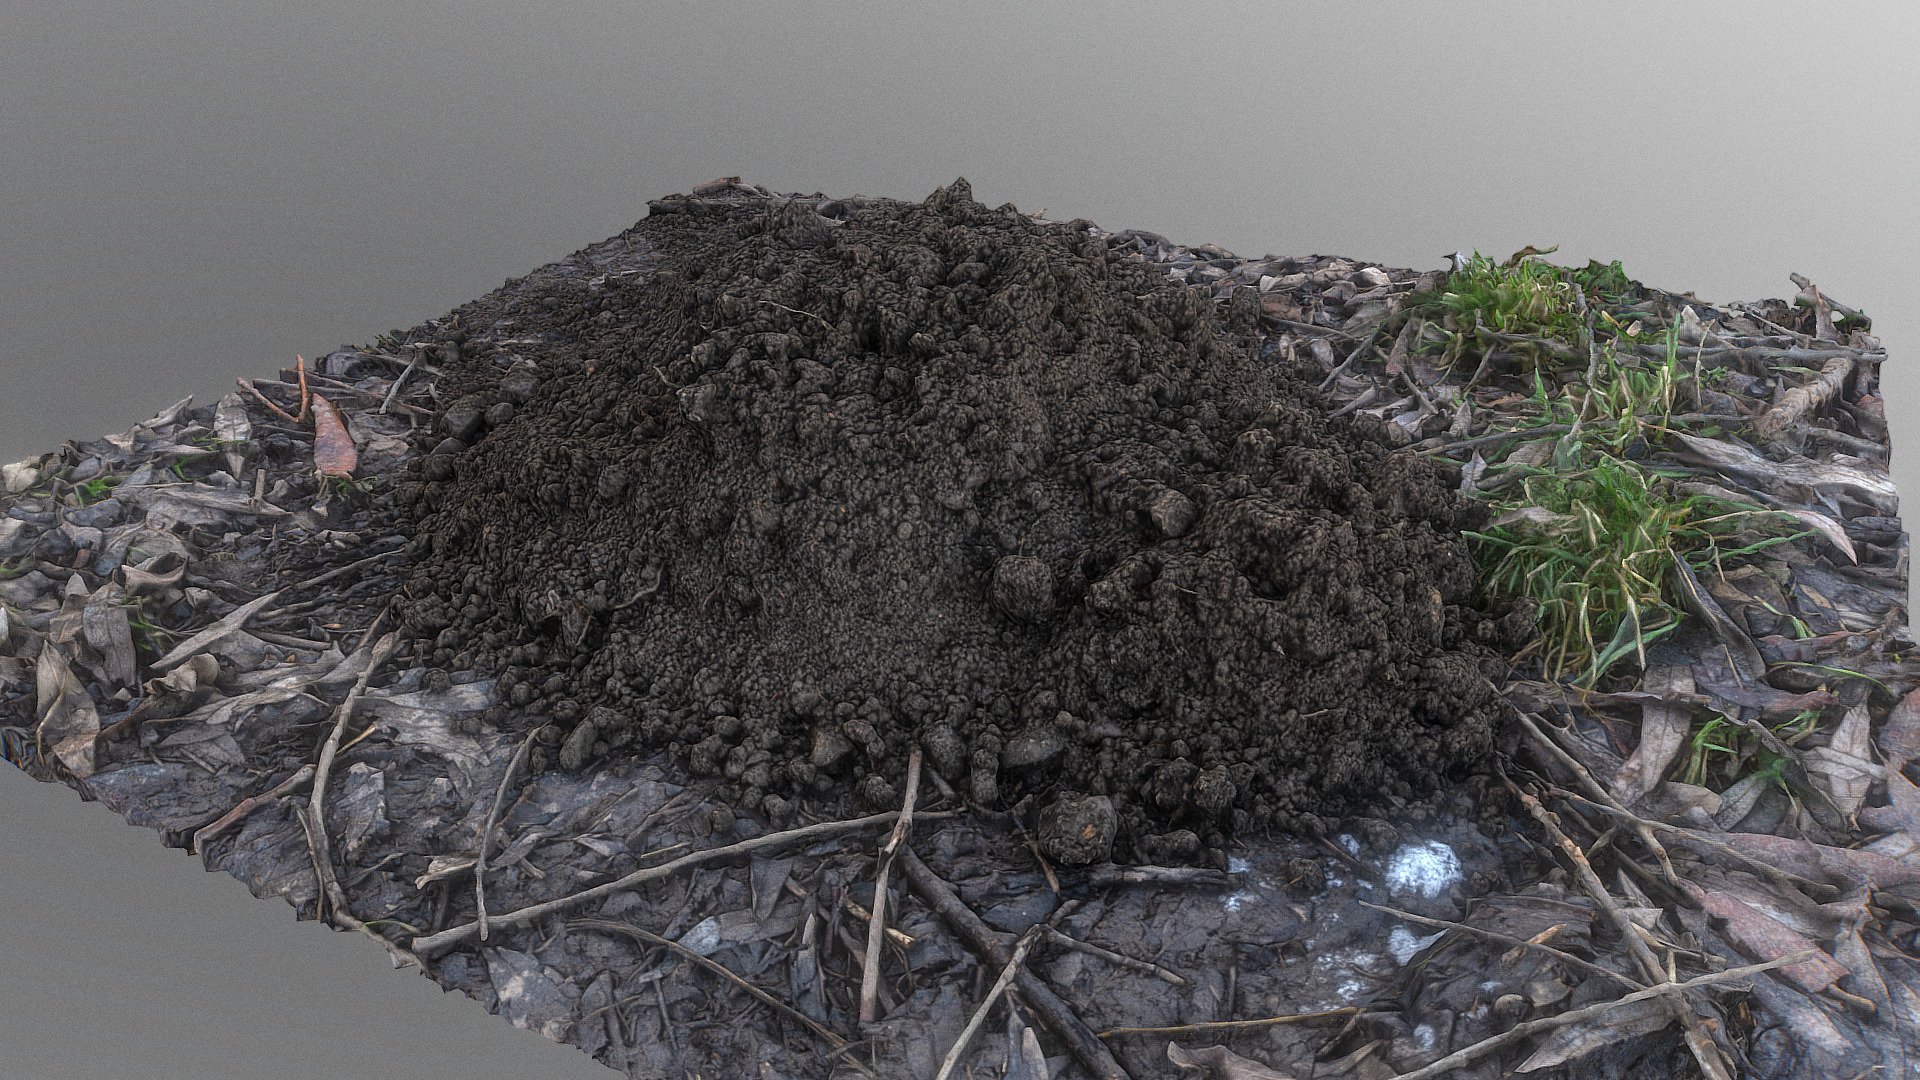 Molehill in winter grass ground with small branches and bits of snow

photogrammetry scan (50x24MP) - Molehill - Buy Royalty Free 3D model by matousekfoto 3d model